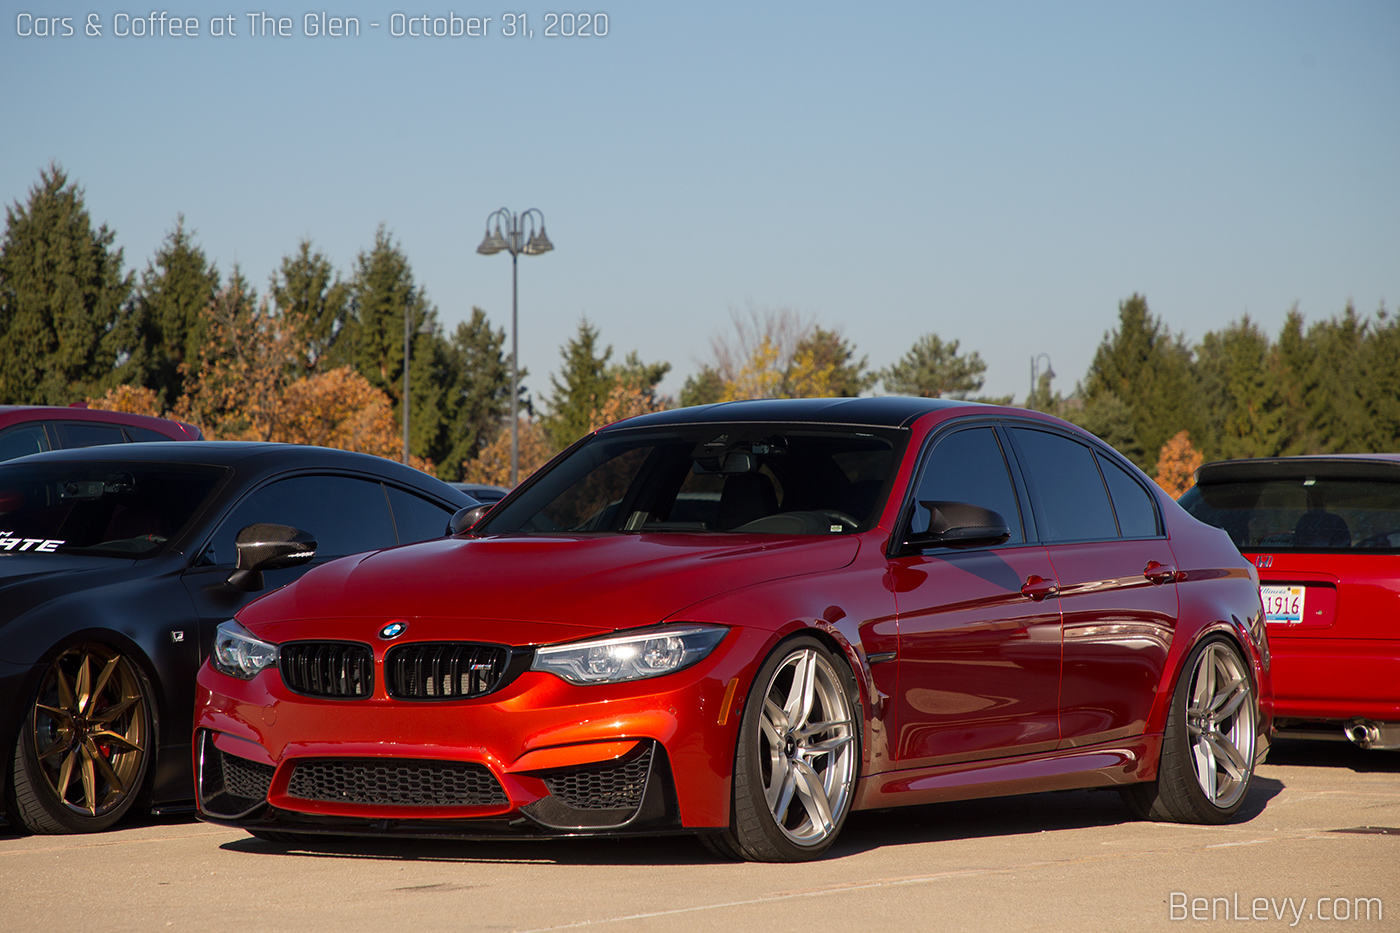 Red BMW M3 at Cars & Coffee at The Glen